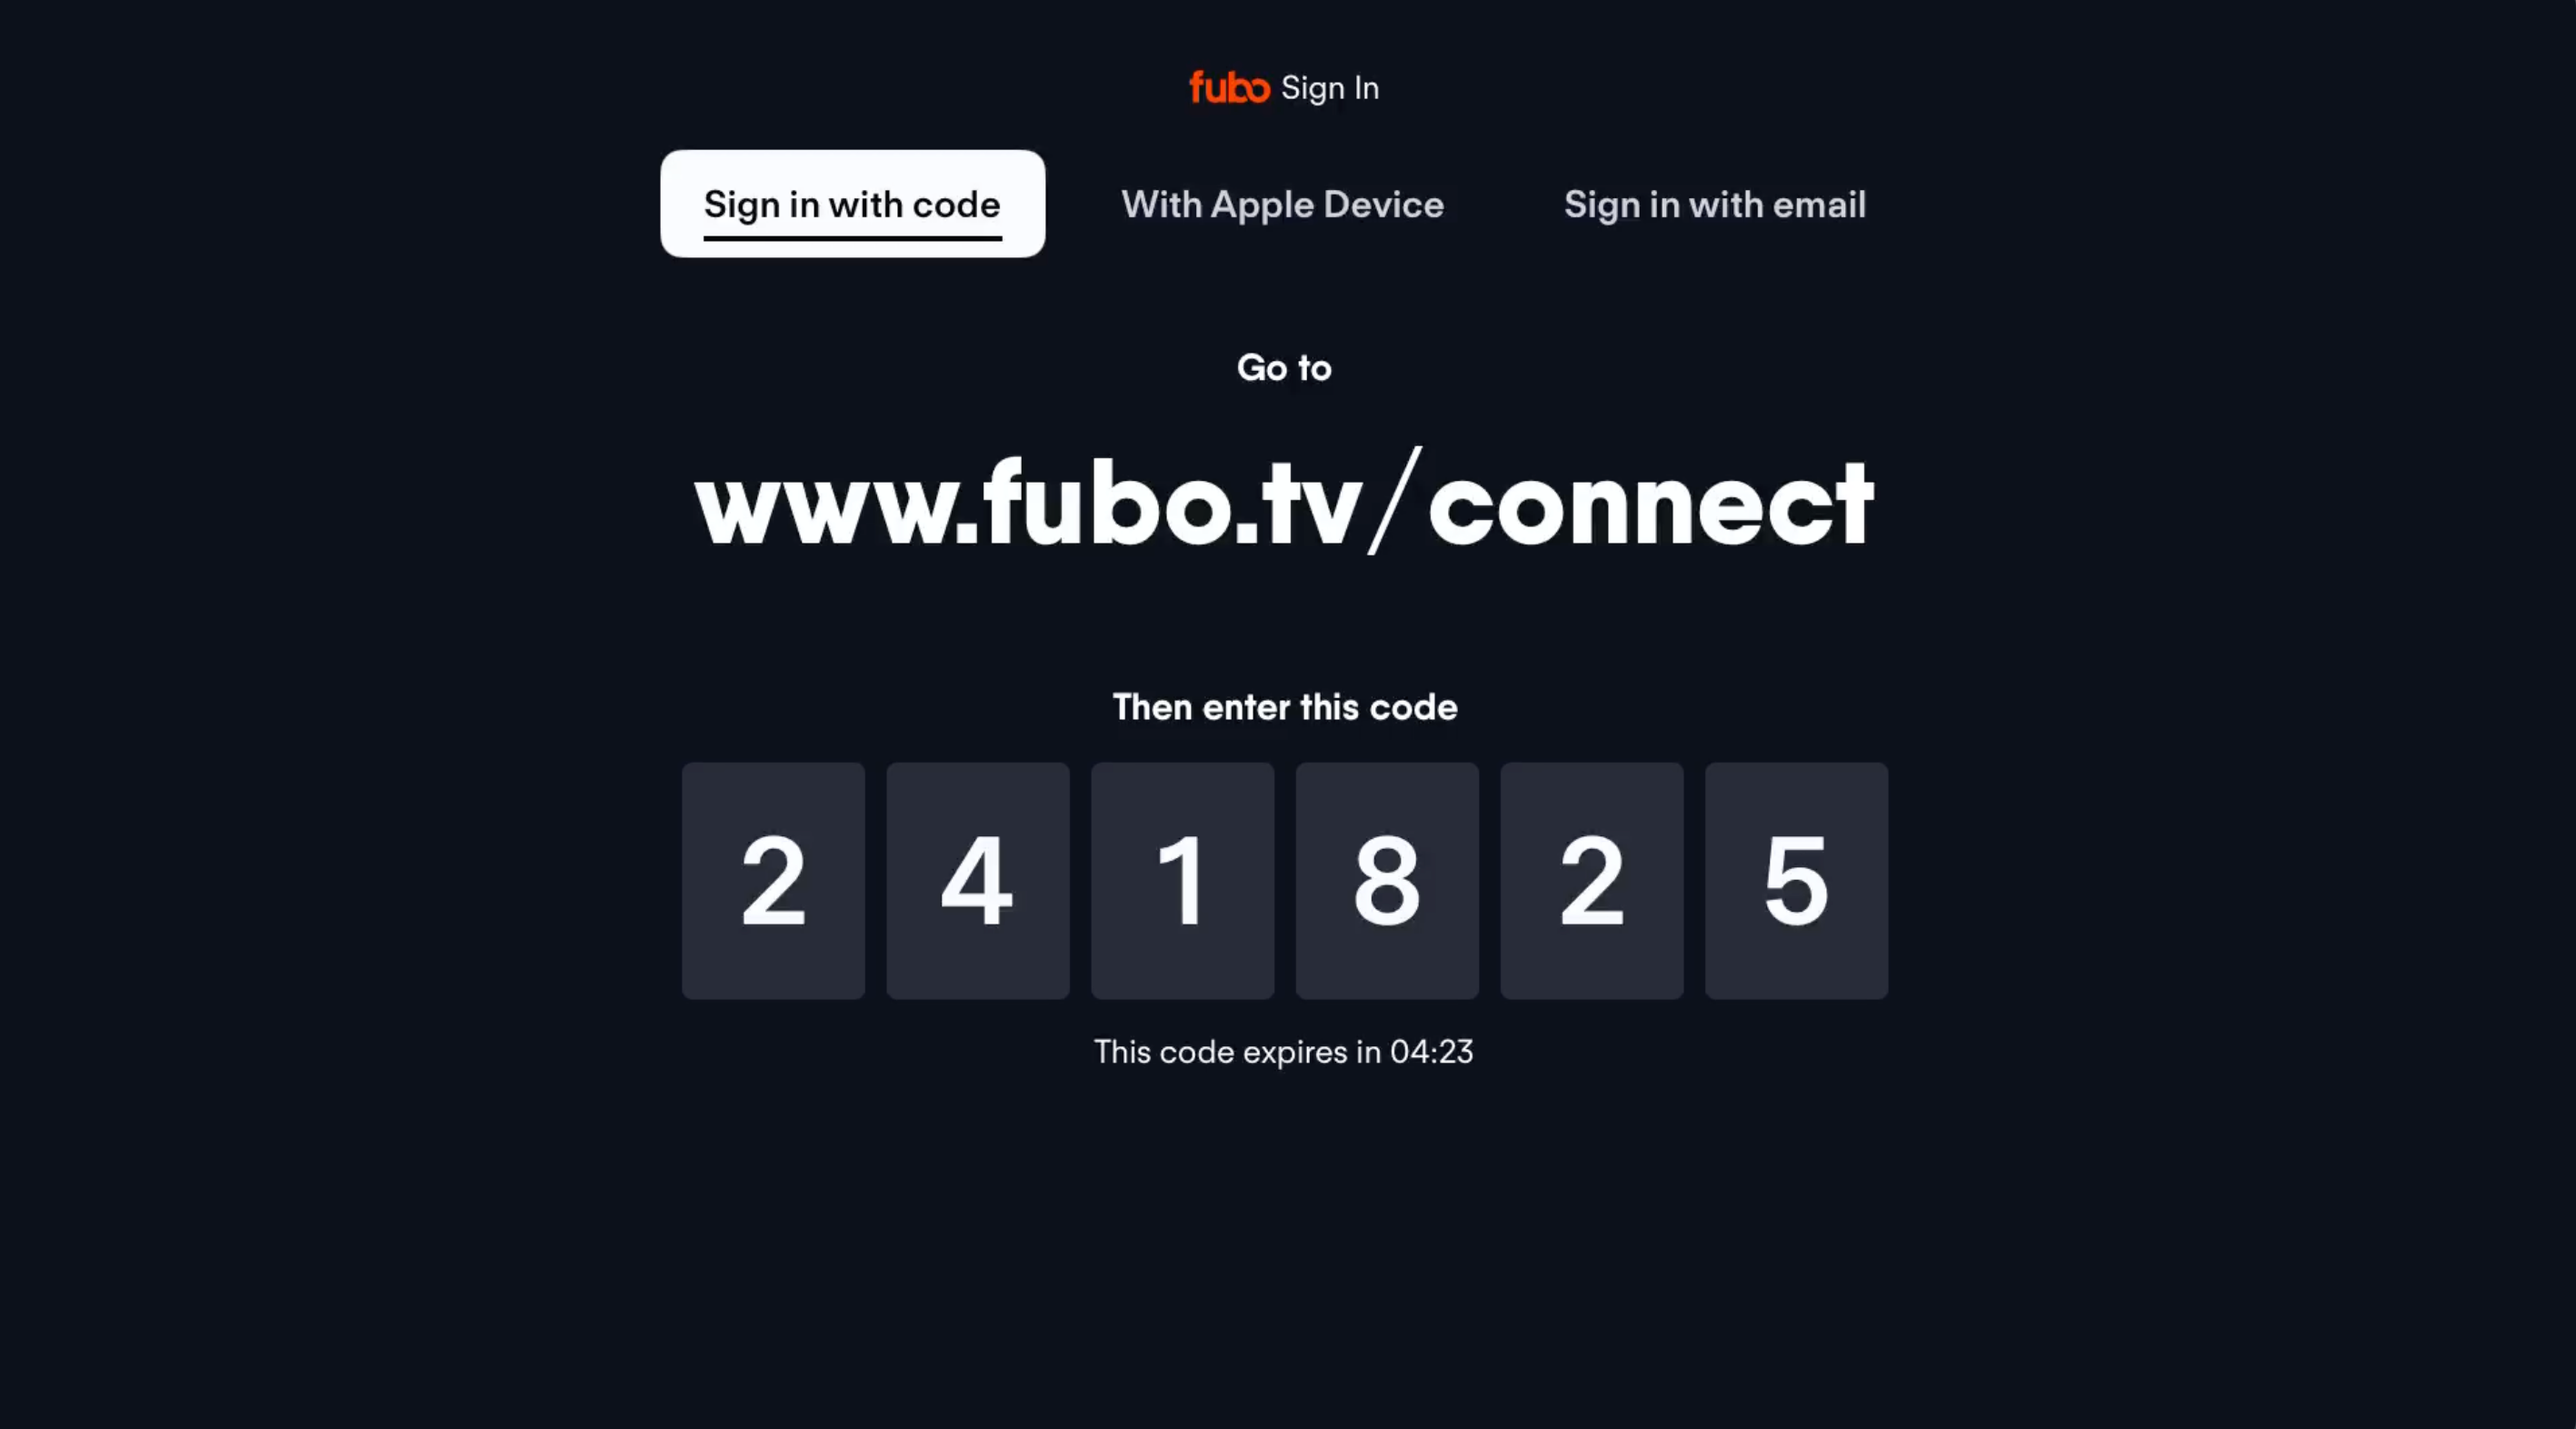 Sample activation code for the FuboTV app on Xbox; visit fubo.tv/connect and enter the code to automatically activate FuboTV on Xbox